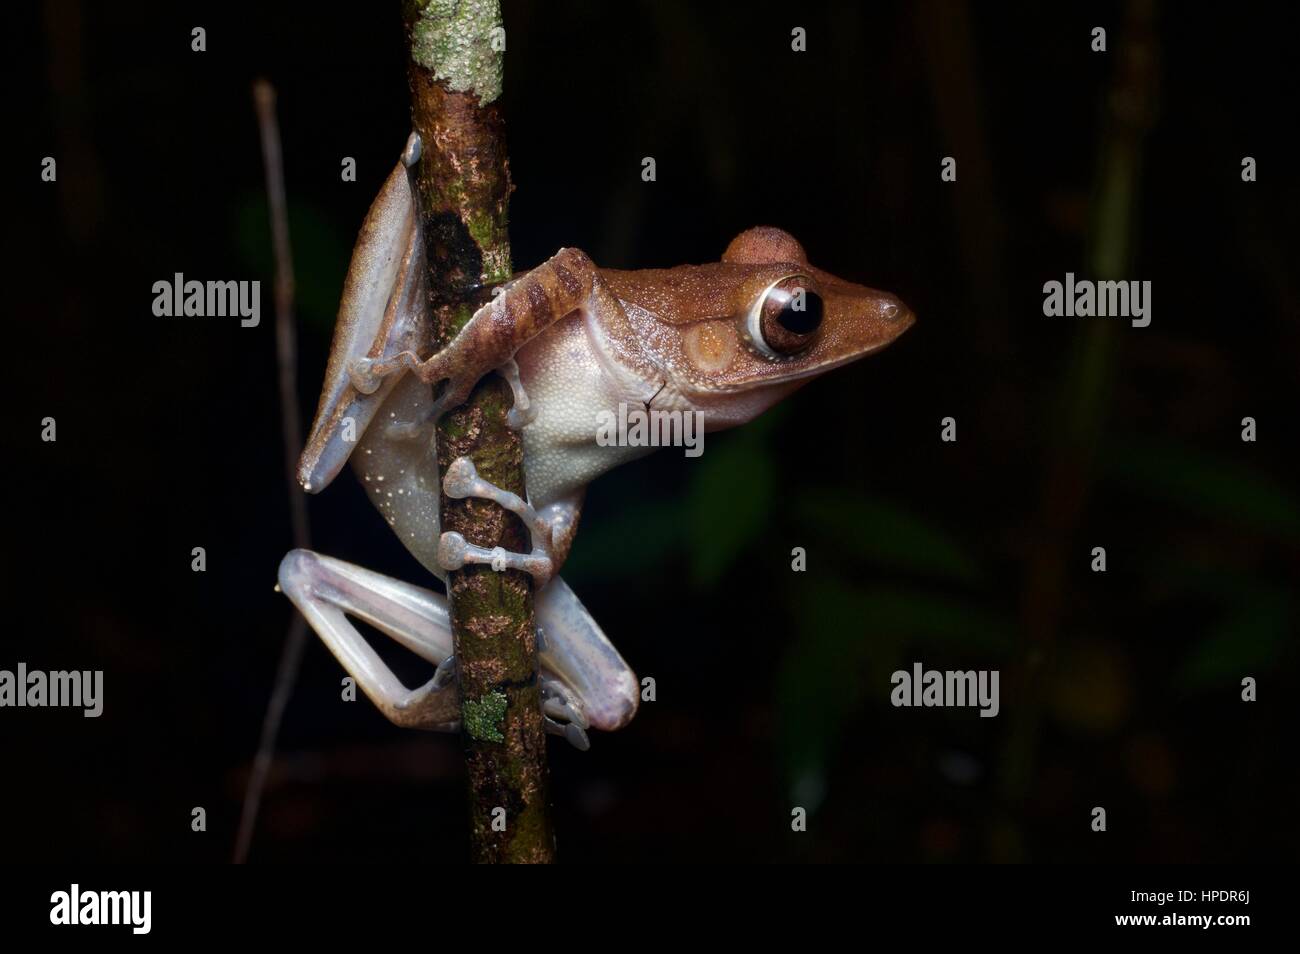 A Collett's Tree Frog perched on a branch in the rainforest at night in Santubong National Park, Sarawak, East Malaysia, Borneo Stock Photo